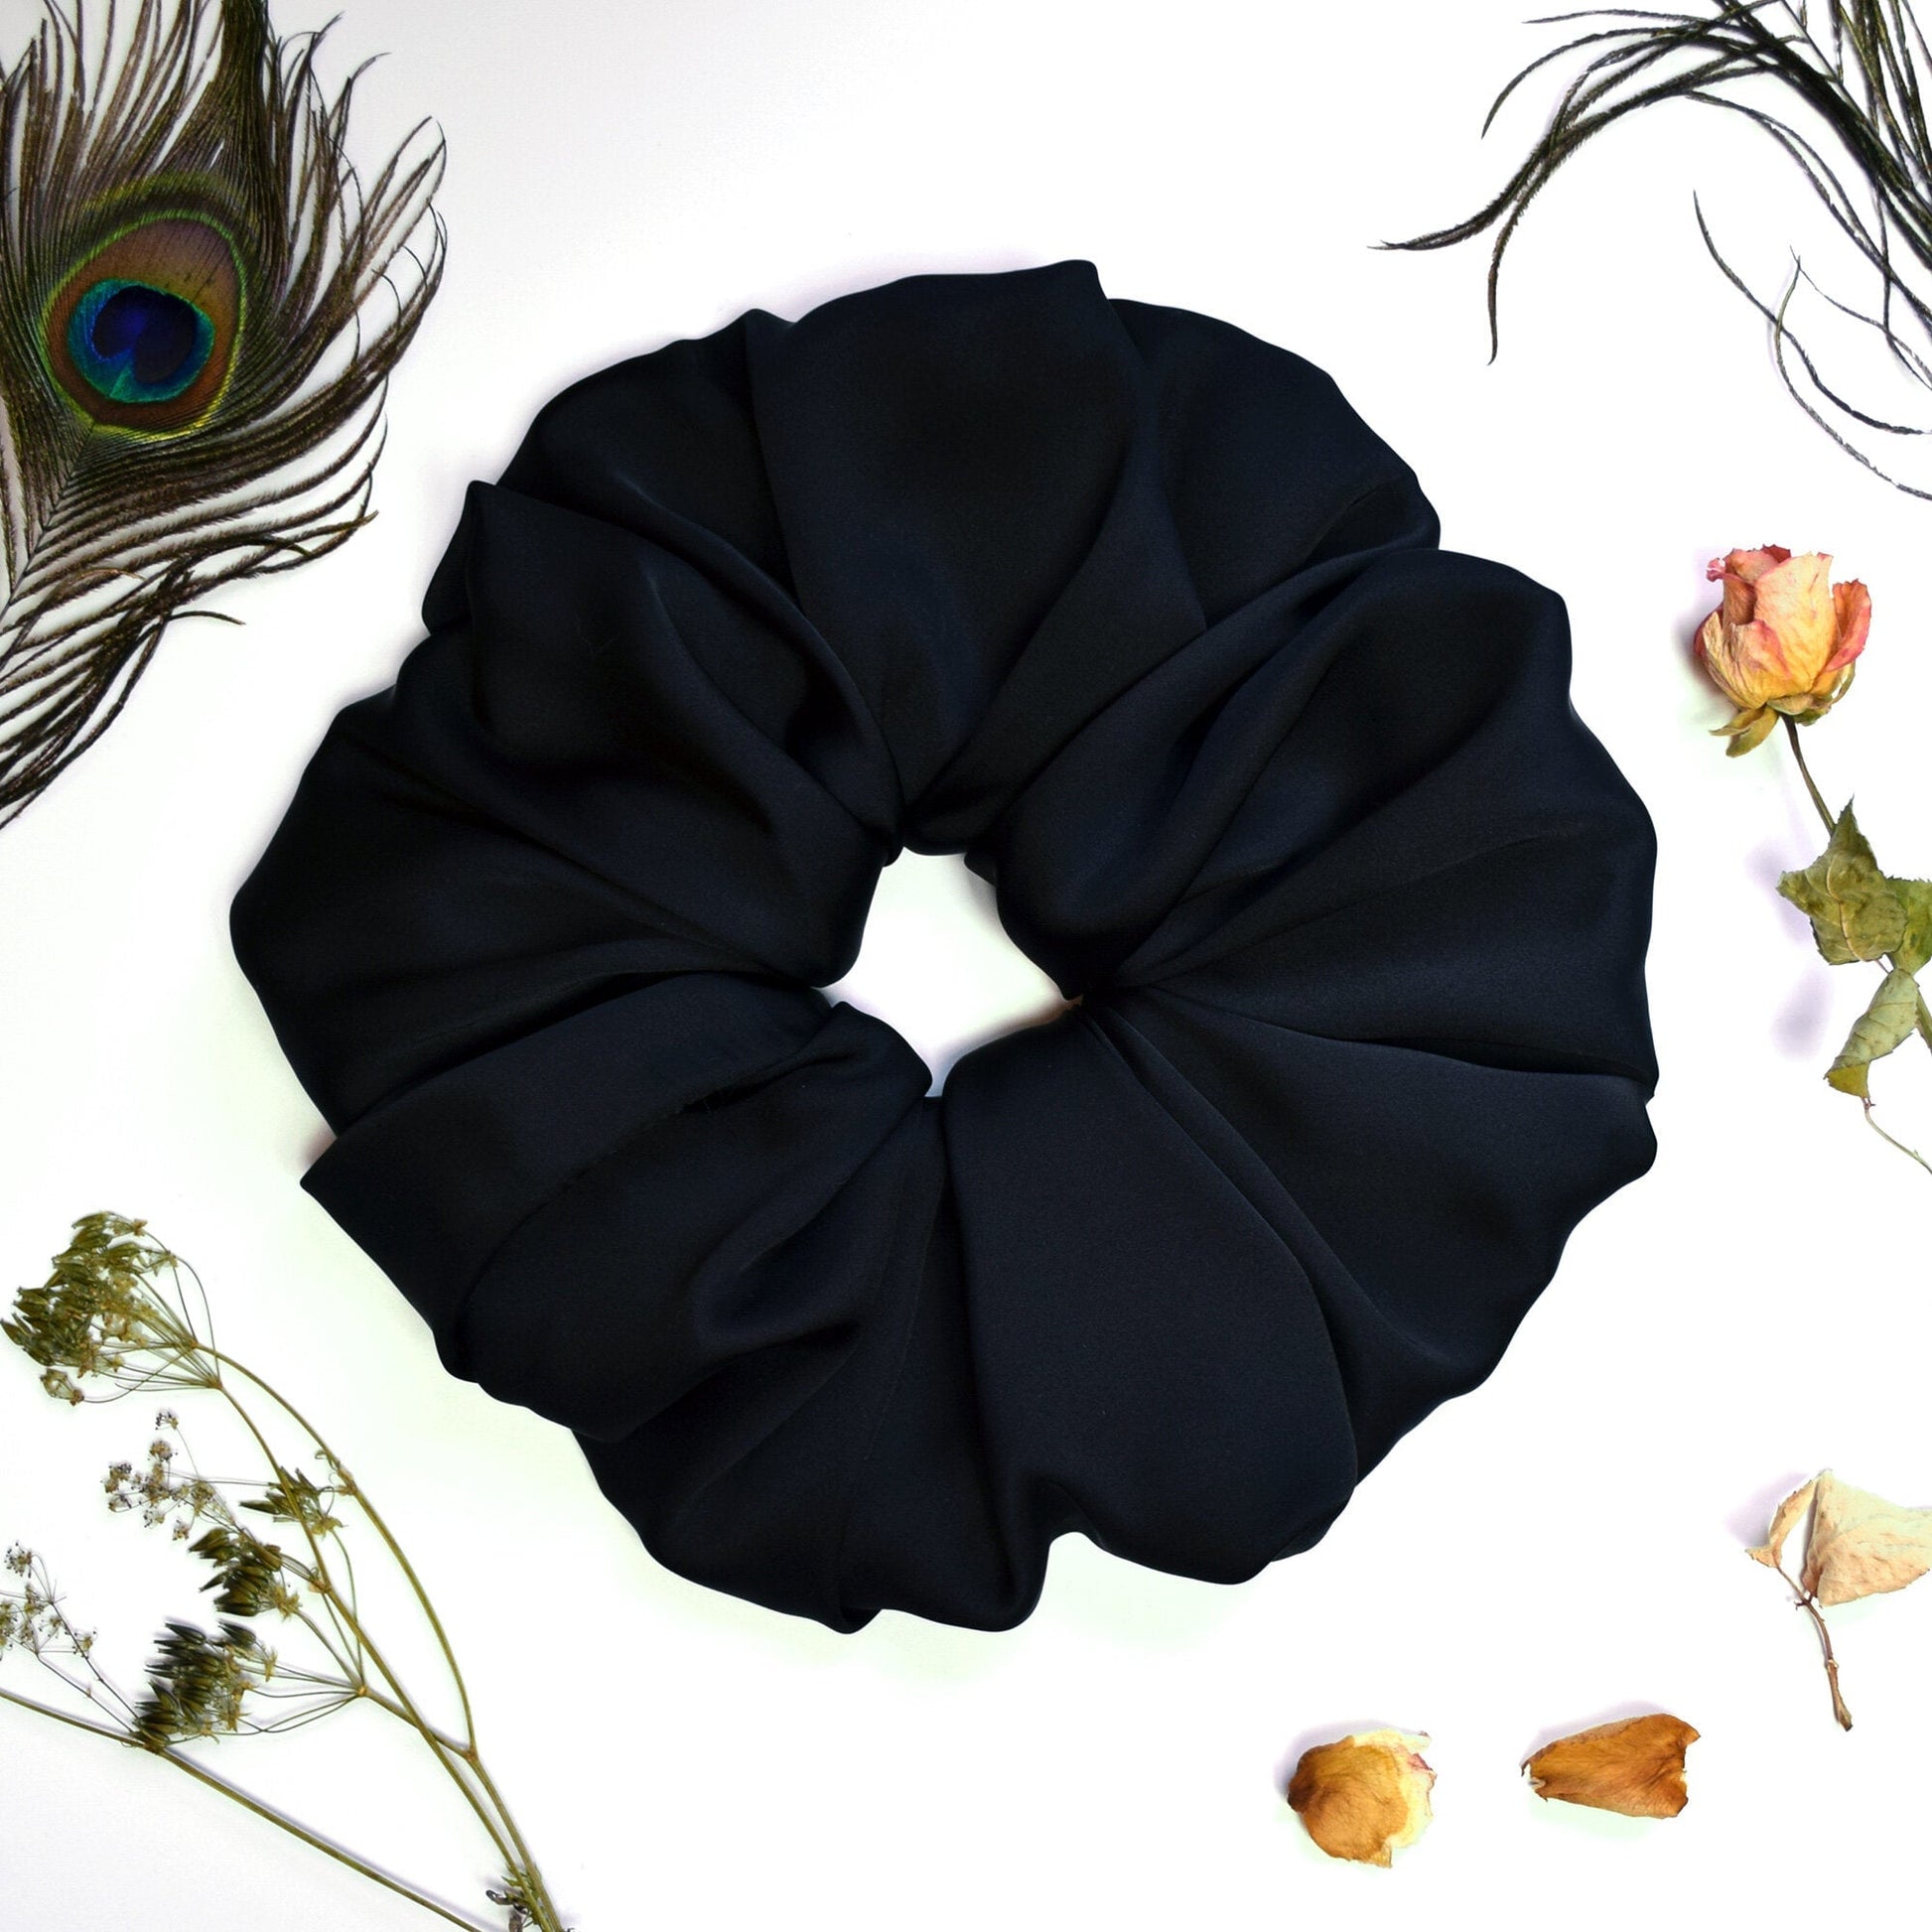 Giant Scrunchie Set in Black White and Metal - Hair 